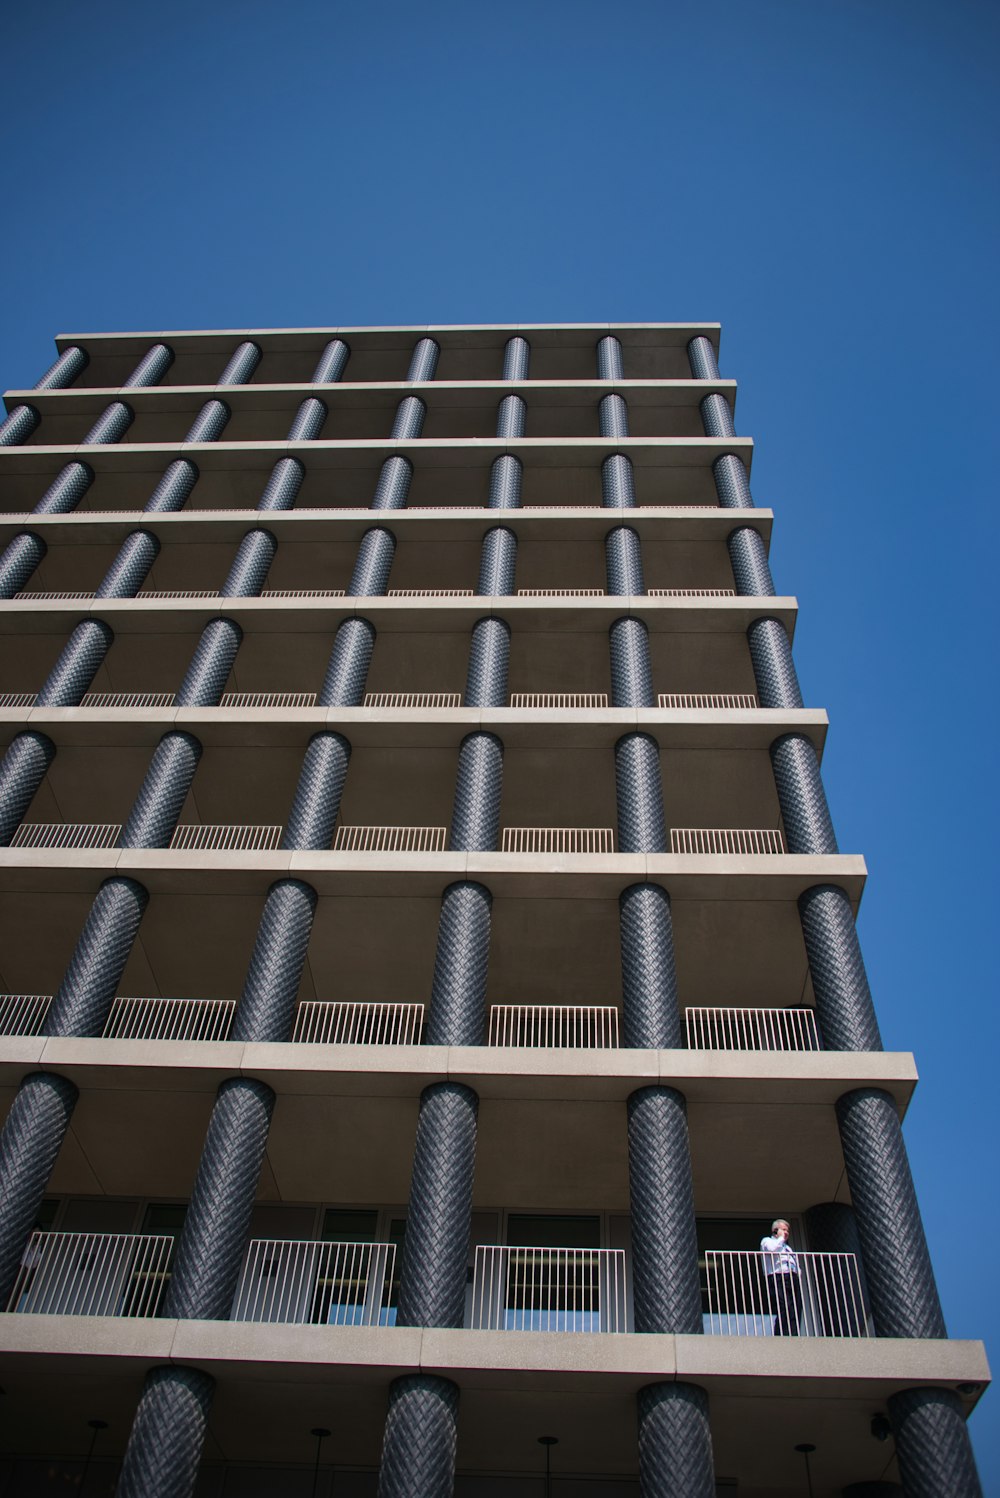 a tall building with a man standing on the balcony